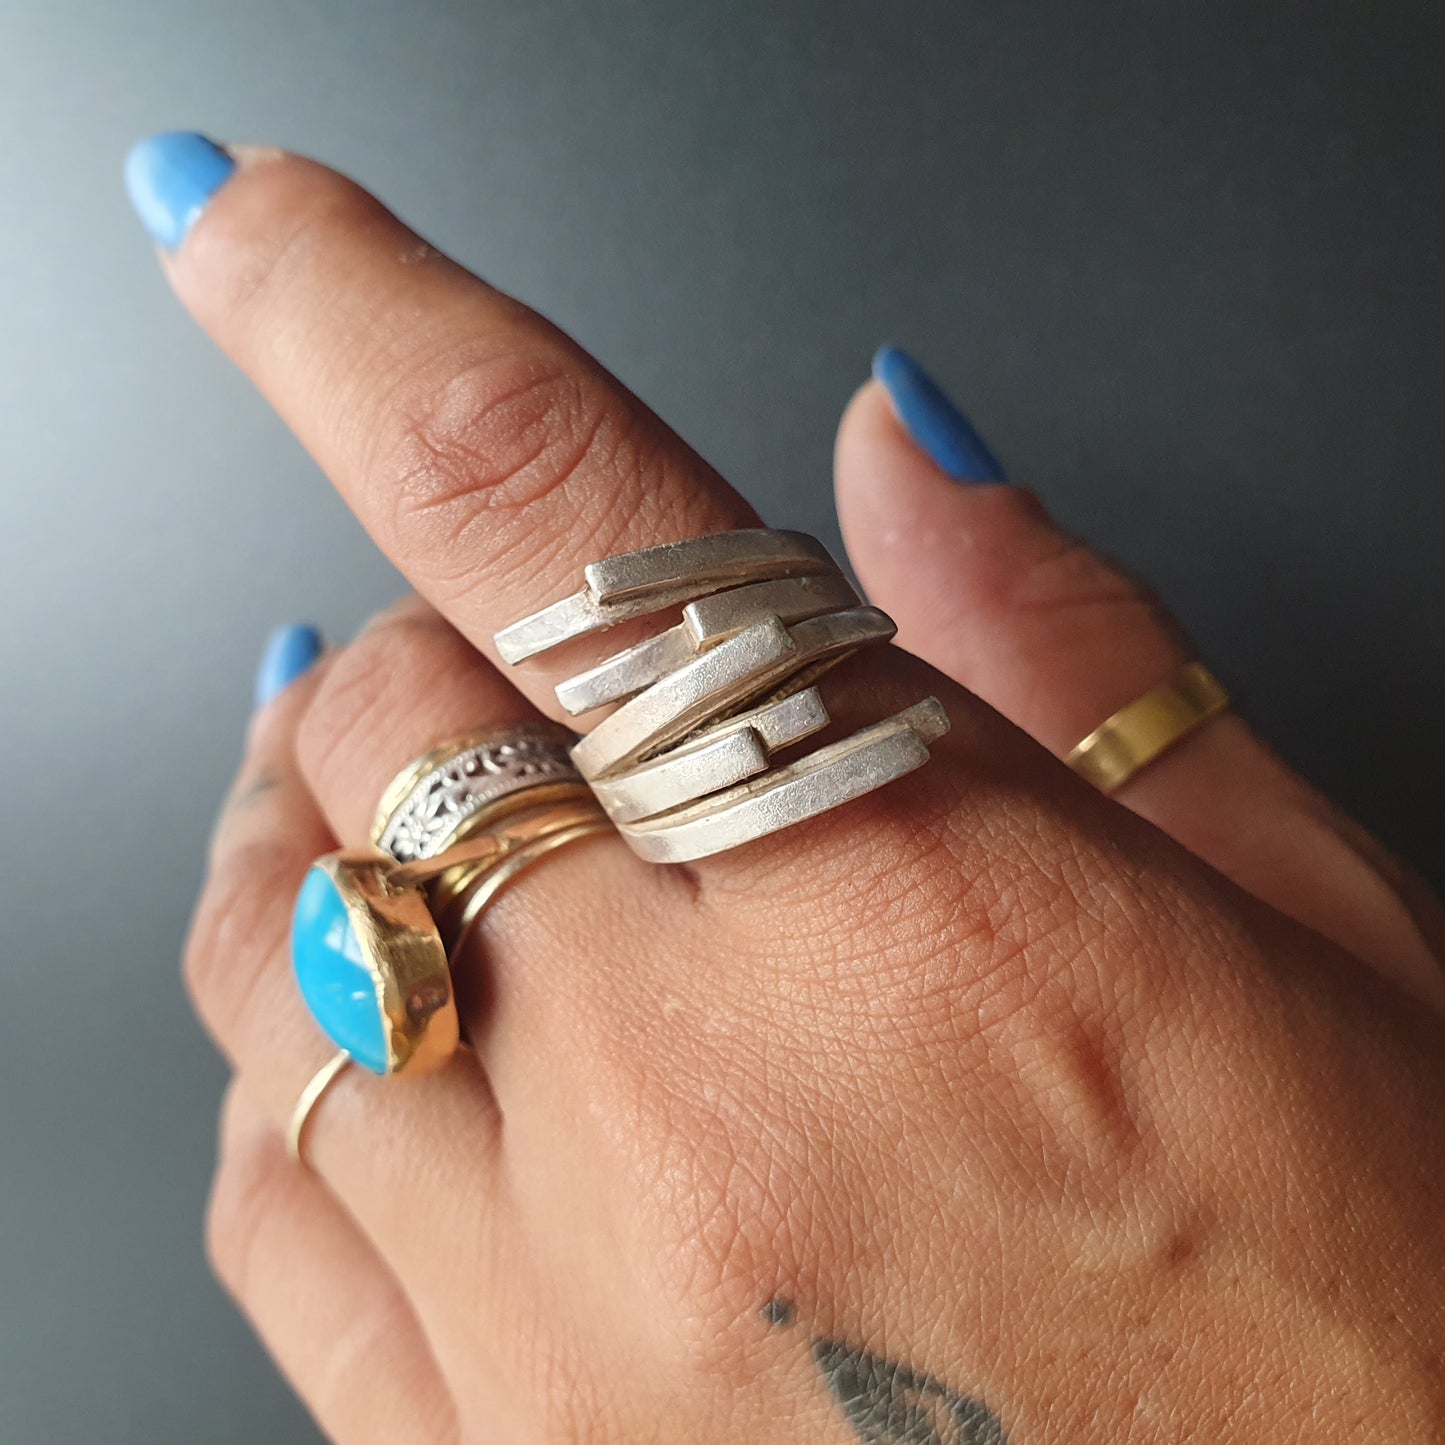 Statement ring, silver Statement ring, long finger ring, Chunky ring, gifts, sterling silver Statement ring, silver jewellery,minimalistic